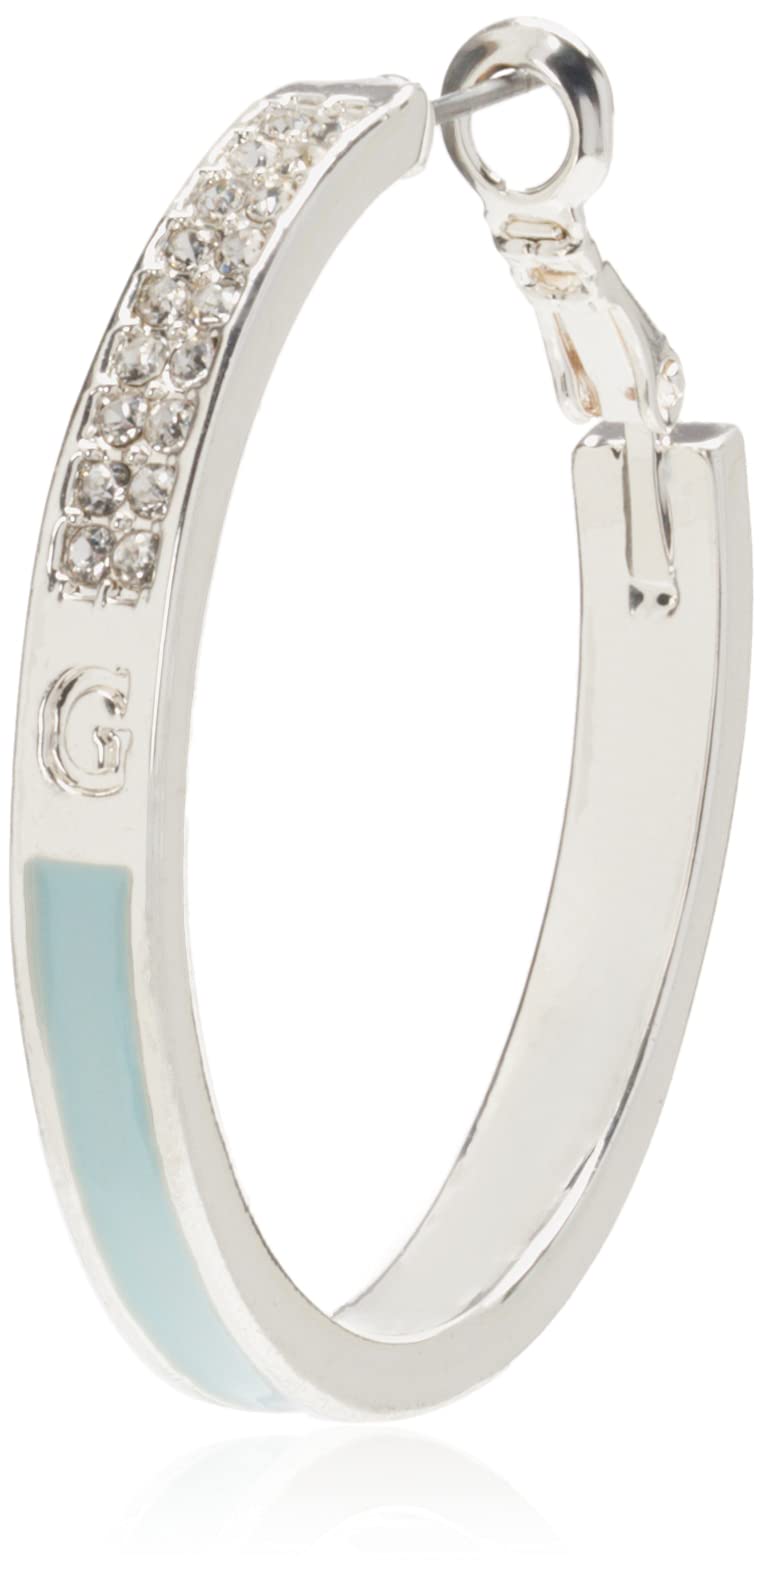 Guess Silvertone Pave Crystal Glass Stone and Light Blue Hoop Earrings